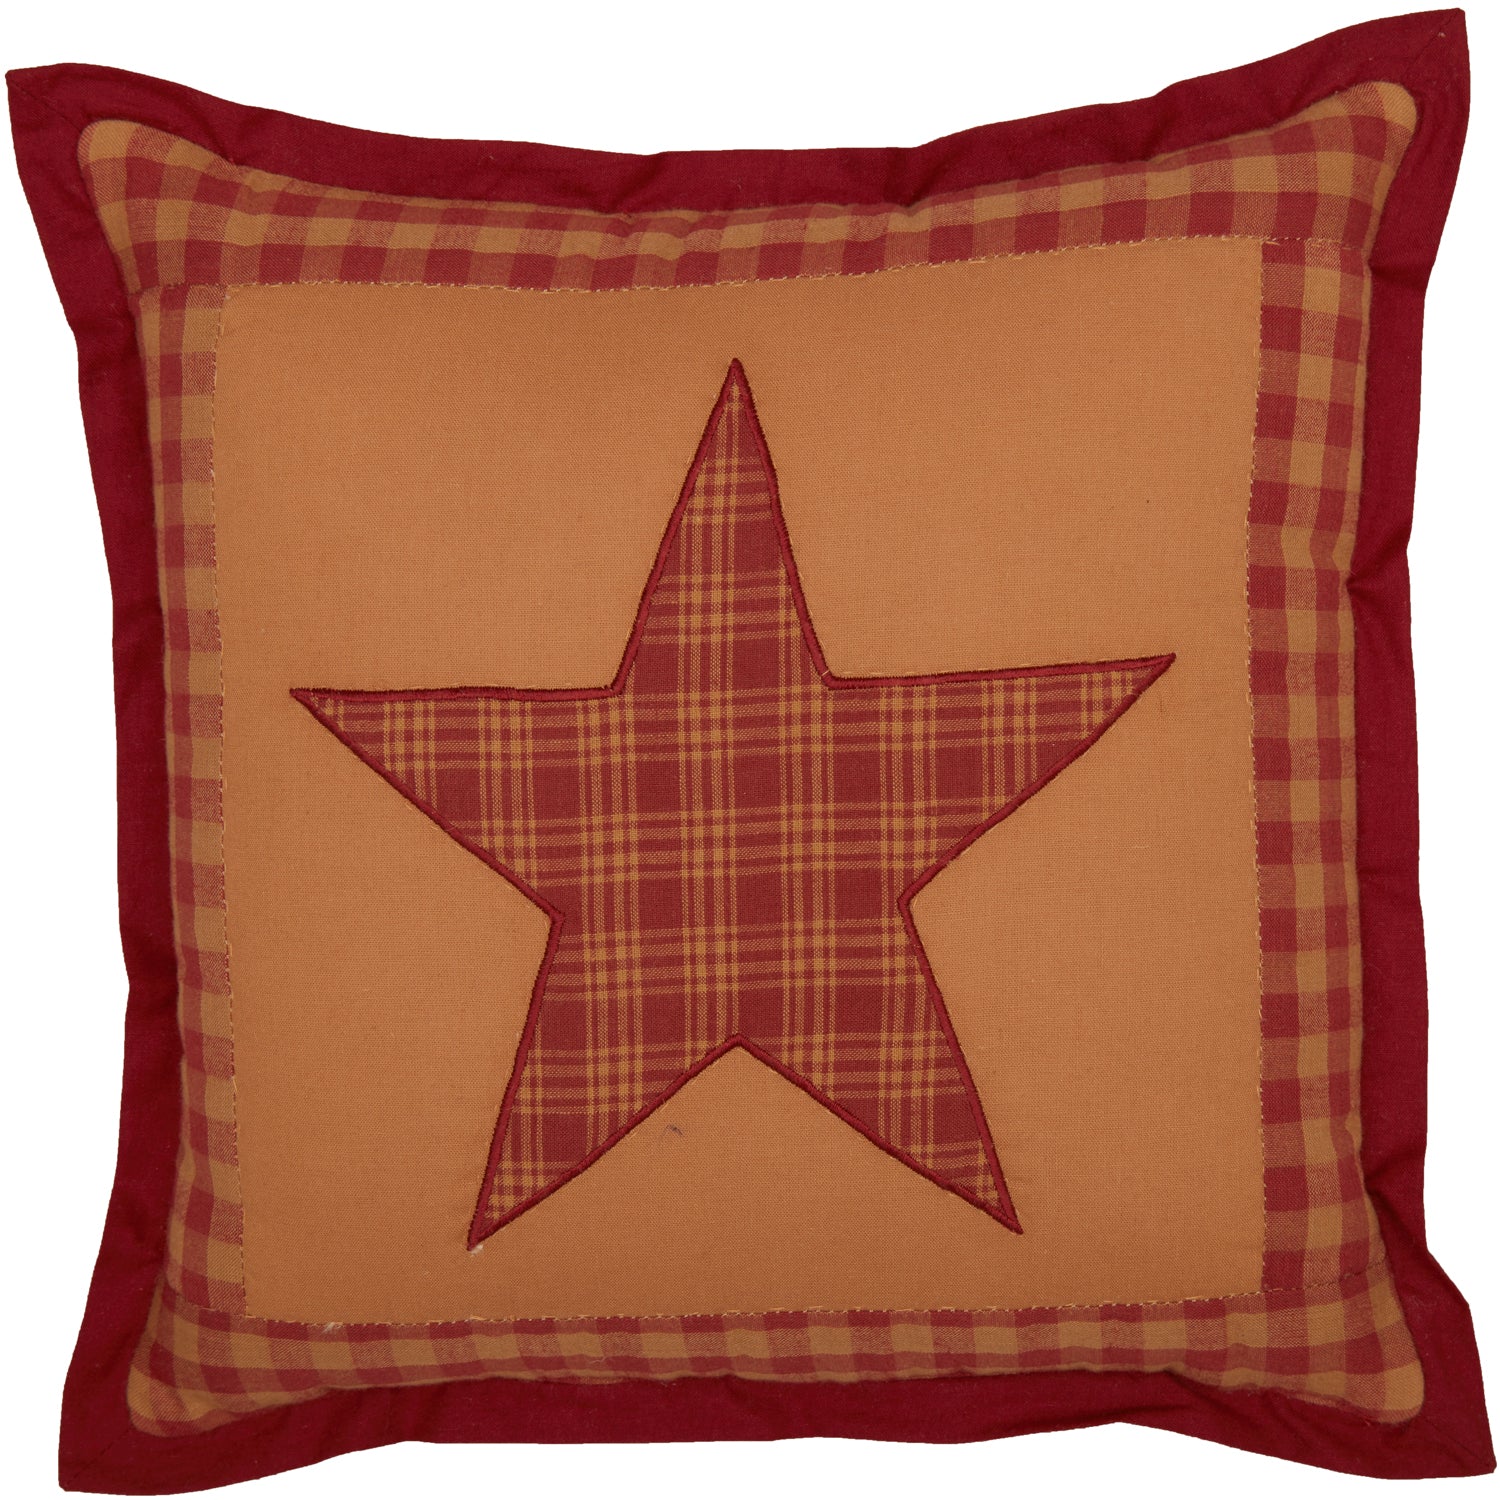 56742-Ninepatch-Star-Quilted-Pillow-12x12-image-4